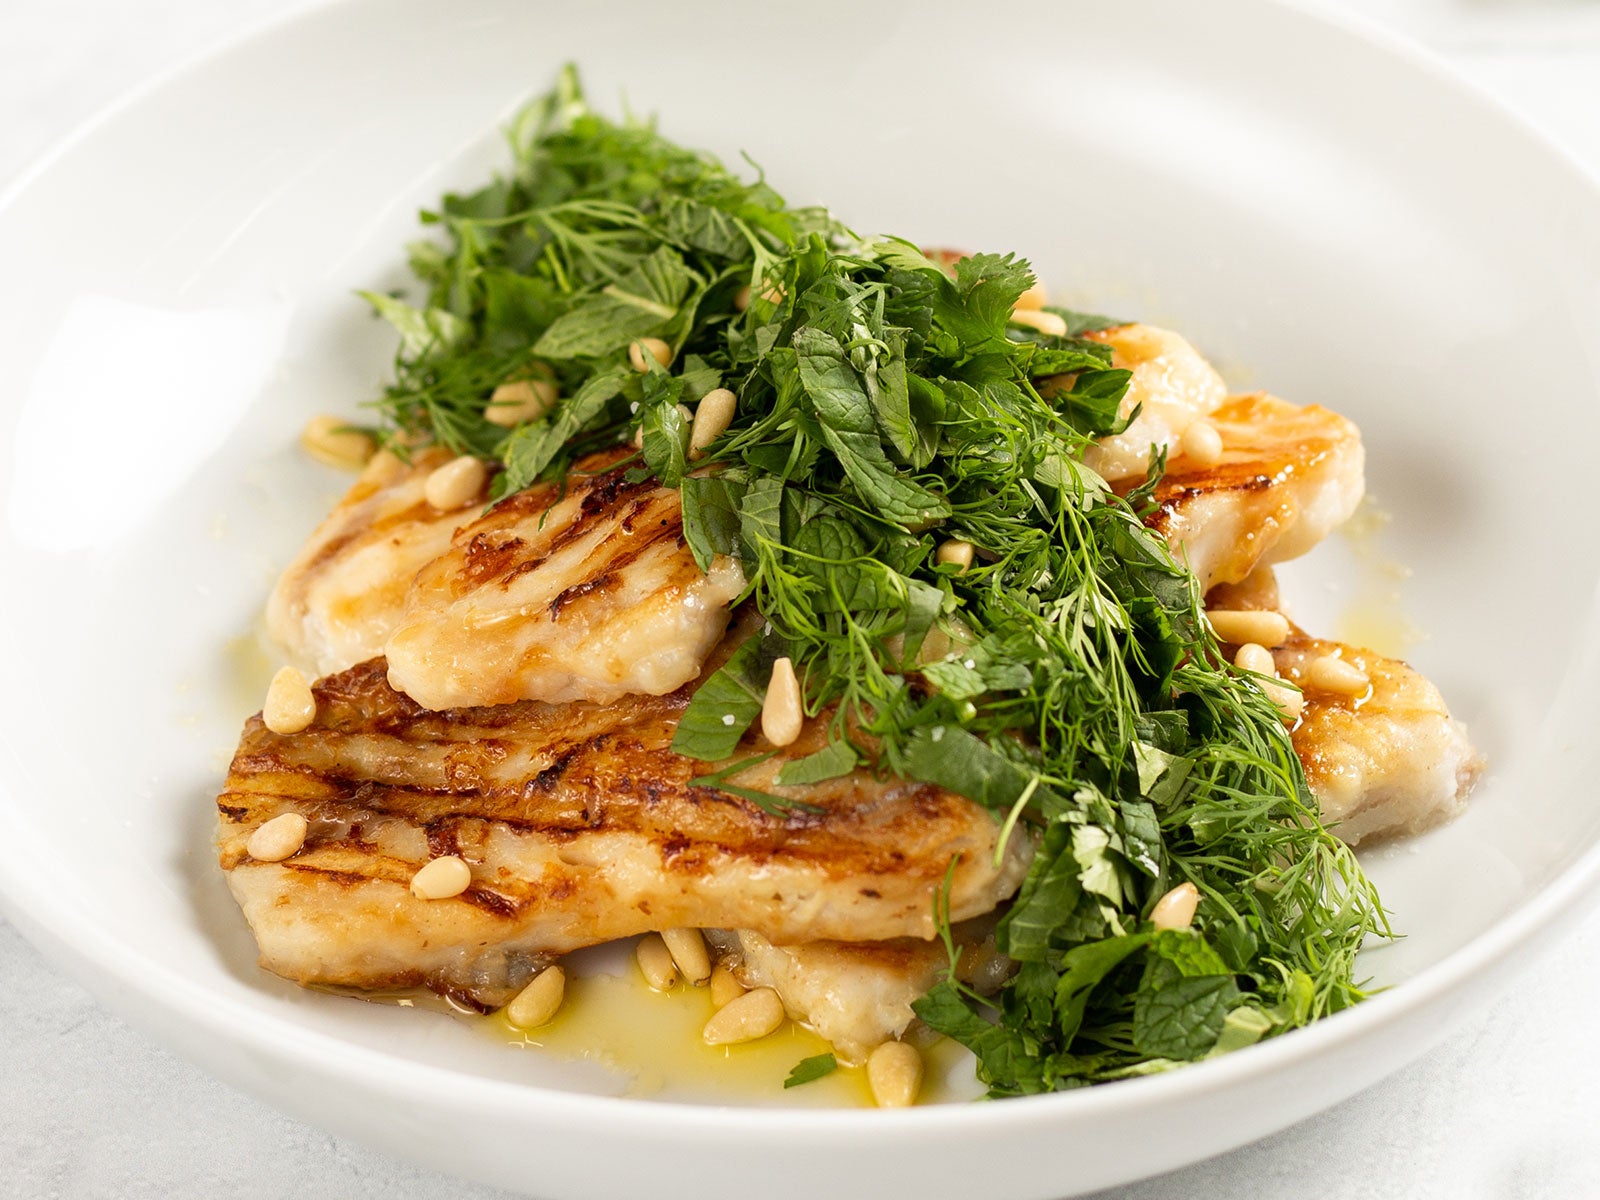 Simple Grilled Alaska Pollock Fillets with Herbs